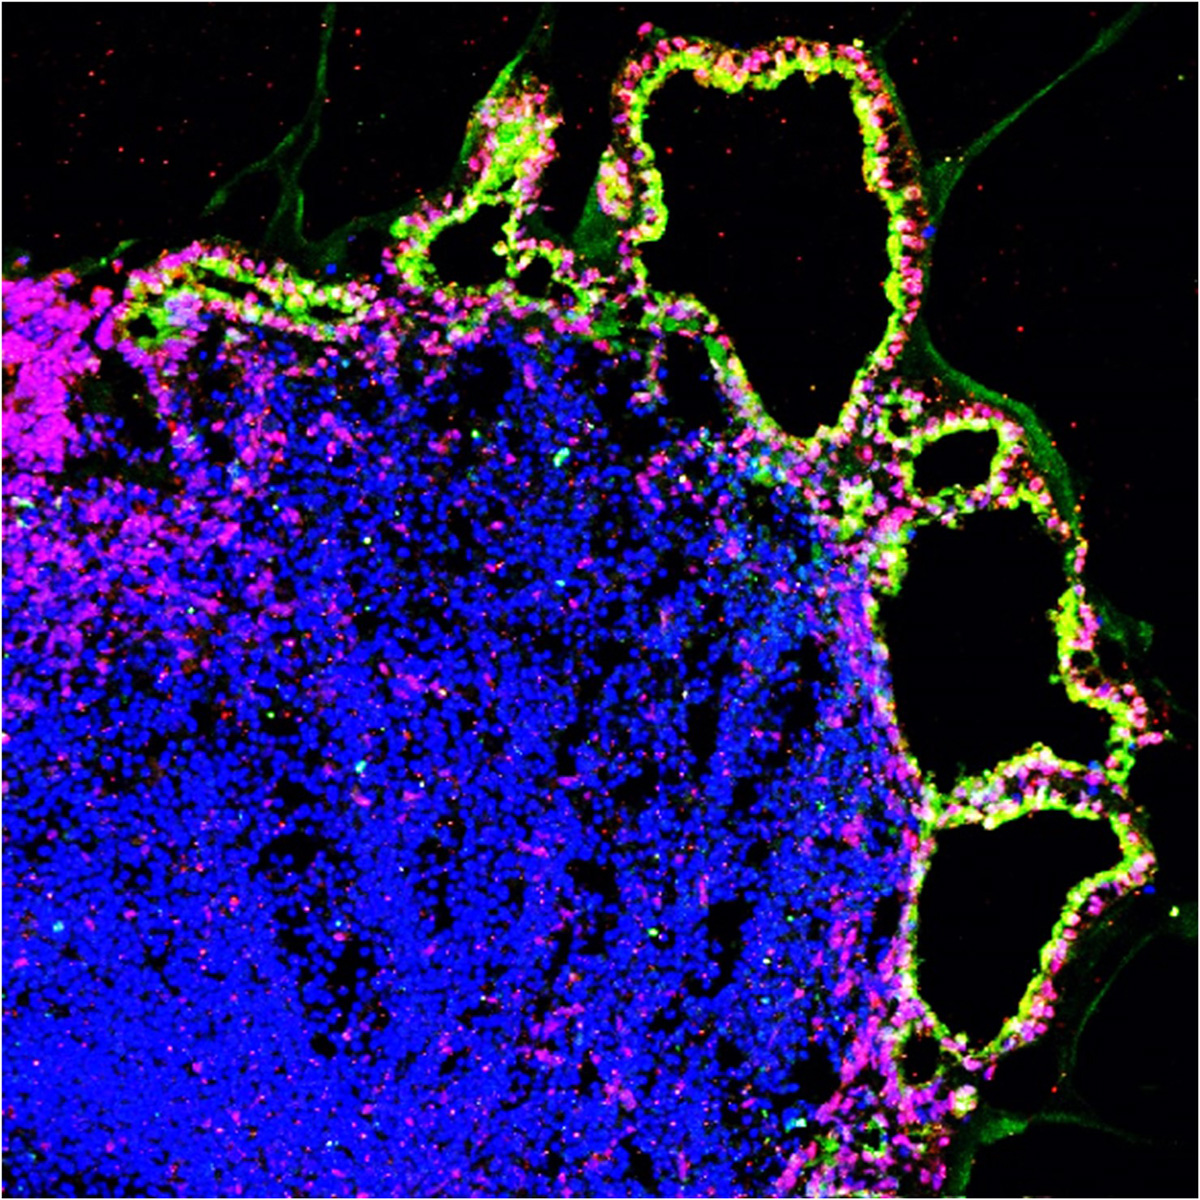 The AIBN team grew Down syndrome brain models and encased them in a layer of specialised cells known as the choroid plexus, effectively creating an organoid with two functional brain domains for the first time.